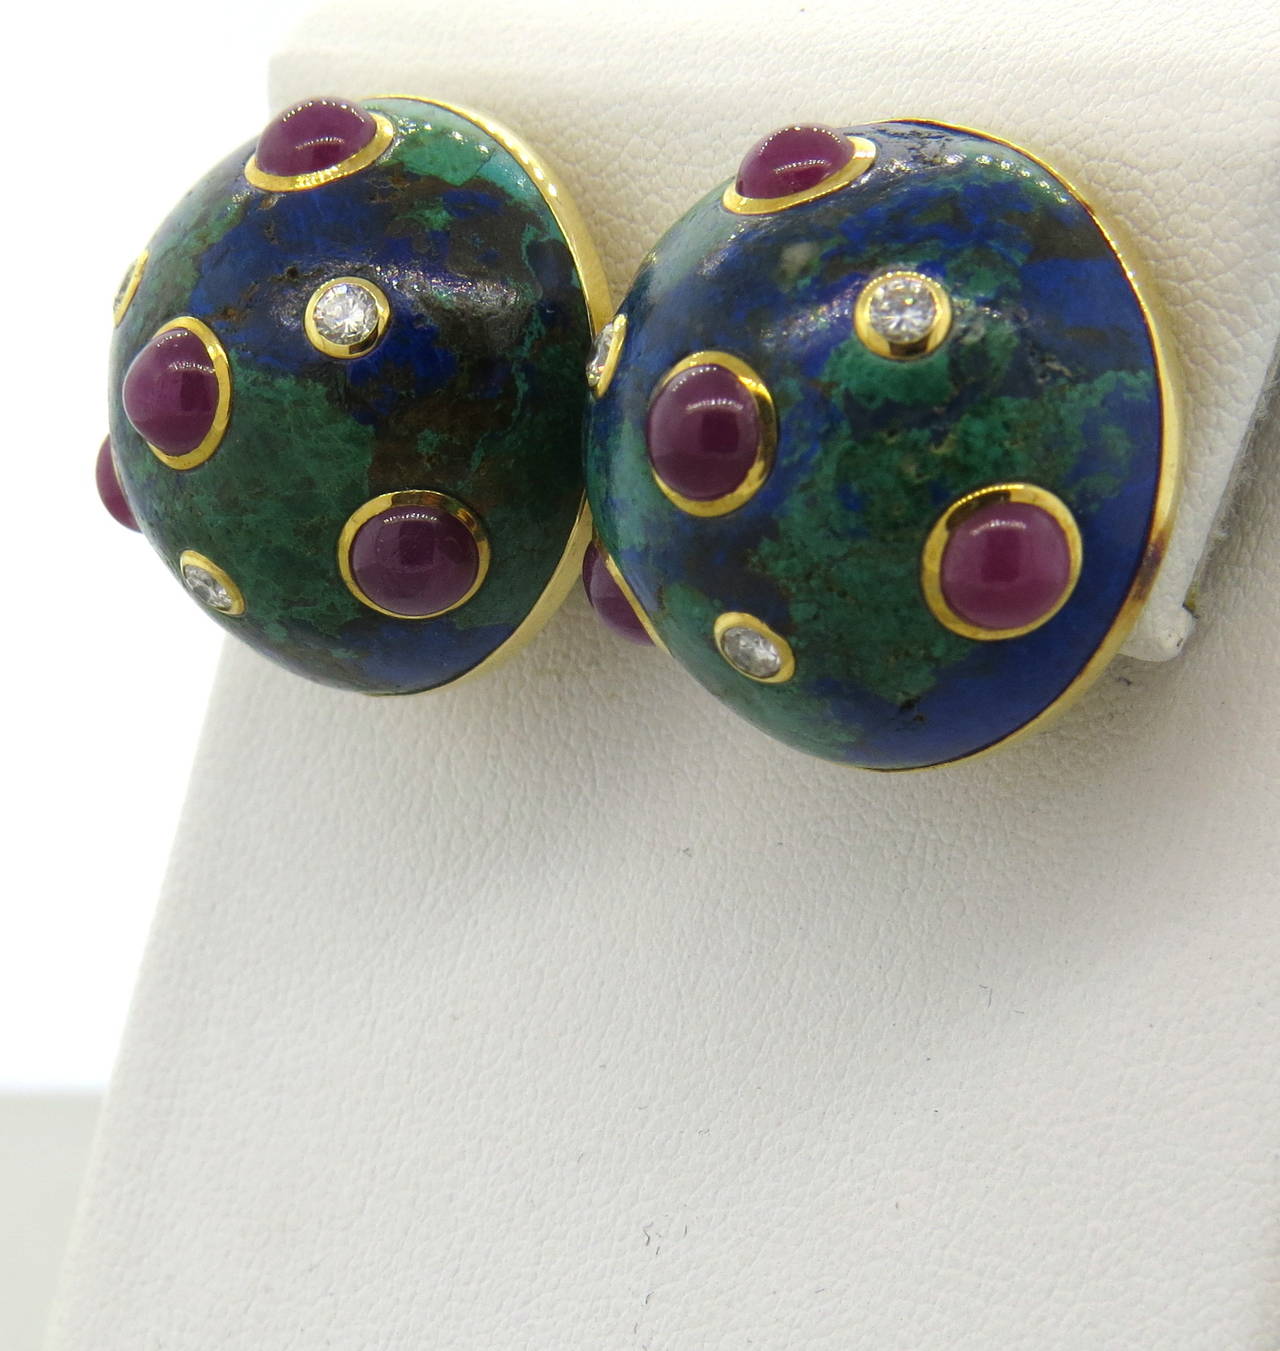 18k gold Trianon earrings, featuring azurite top, adorned with ruby cabochons and approx. 0.36ctw in G/VS diamonds. Earrings are 23mm in diameter. Marked 18k and Trianon. Weight - 32.5 grams